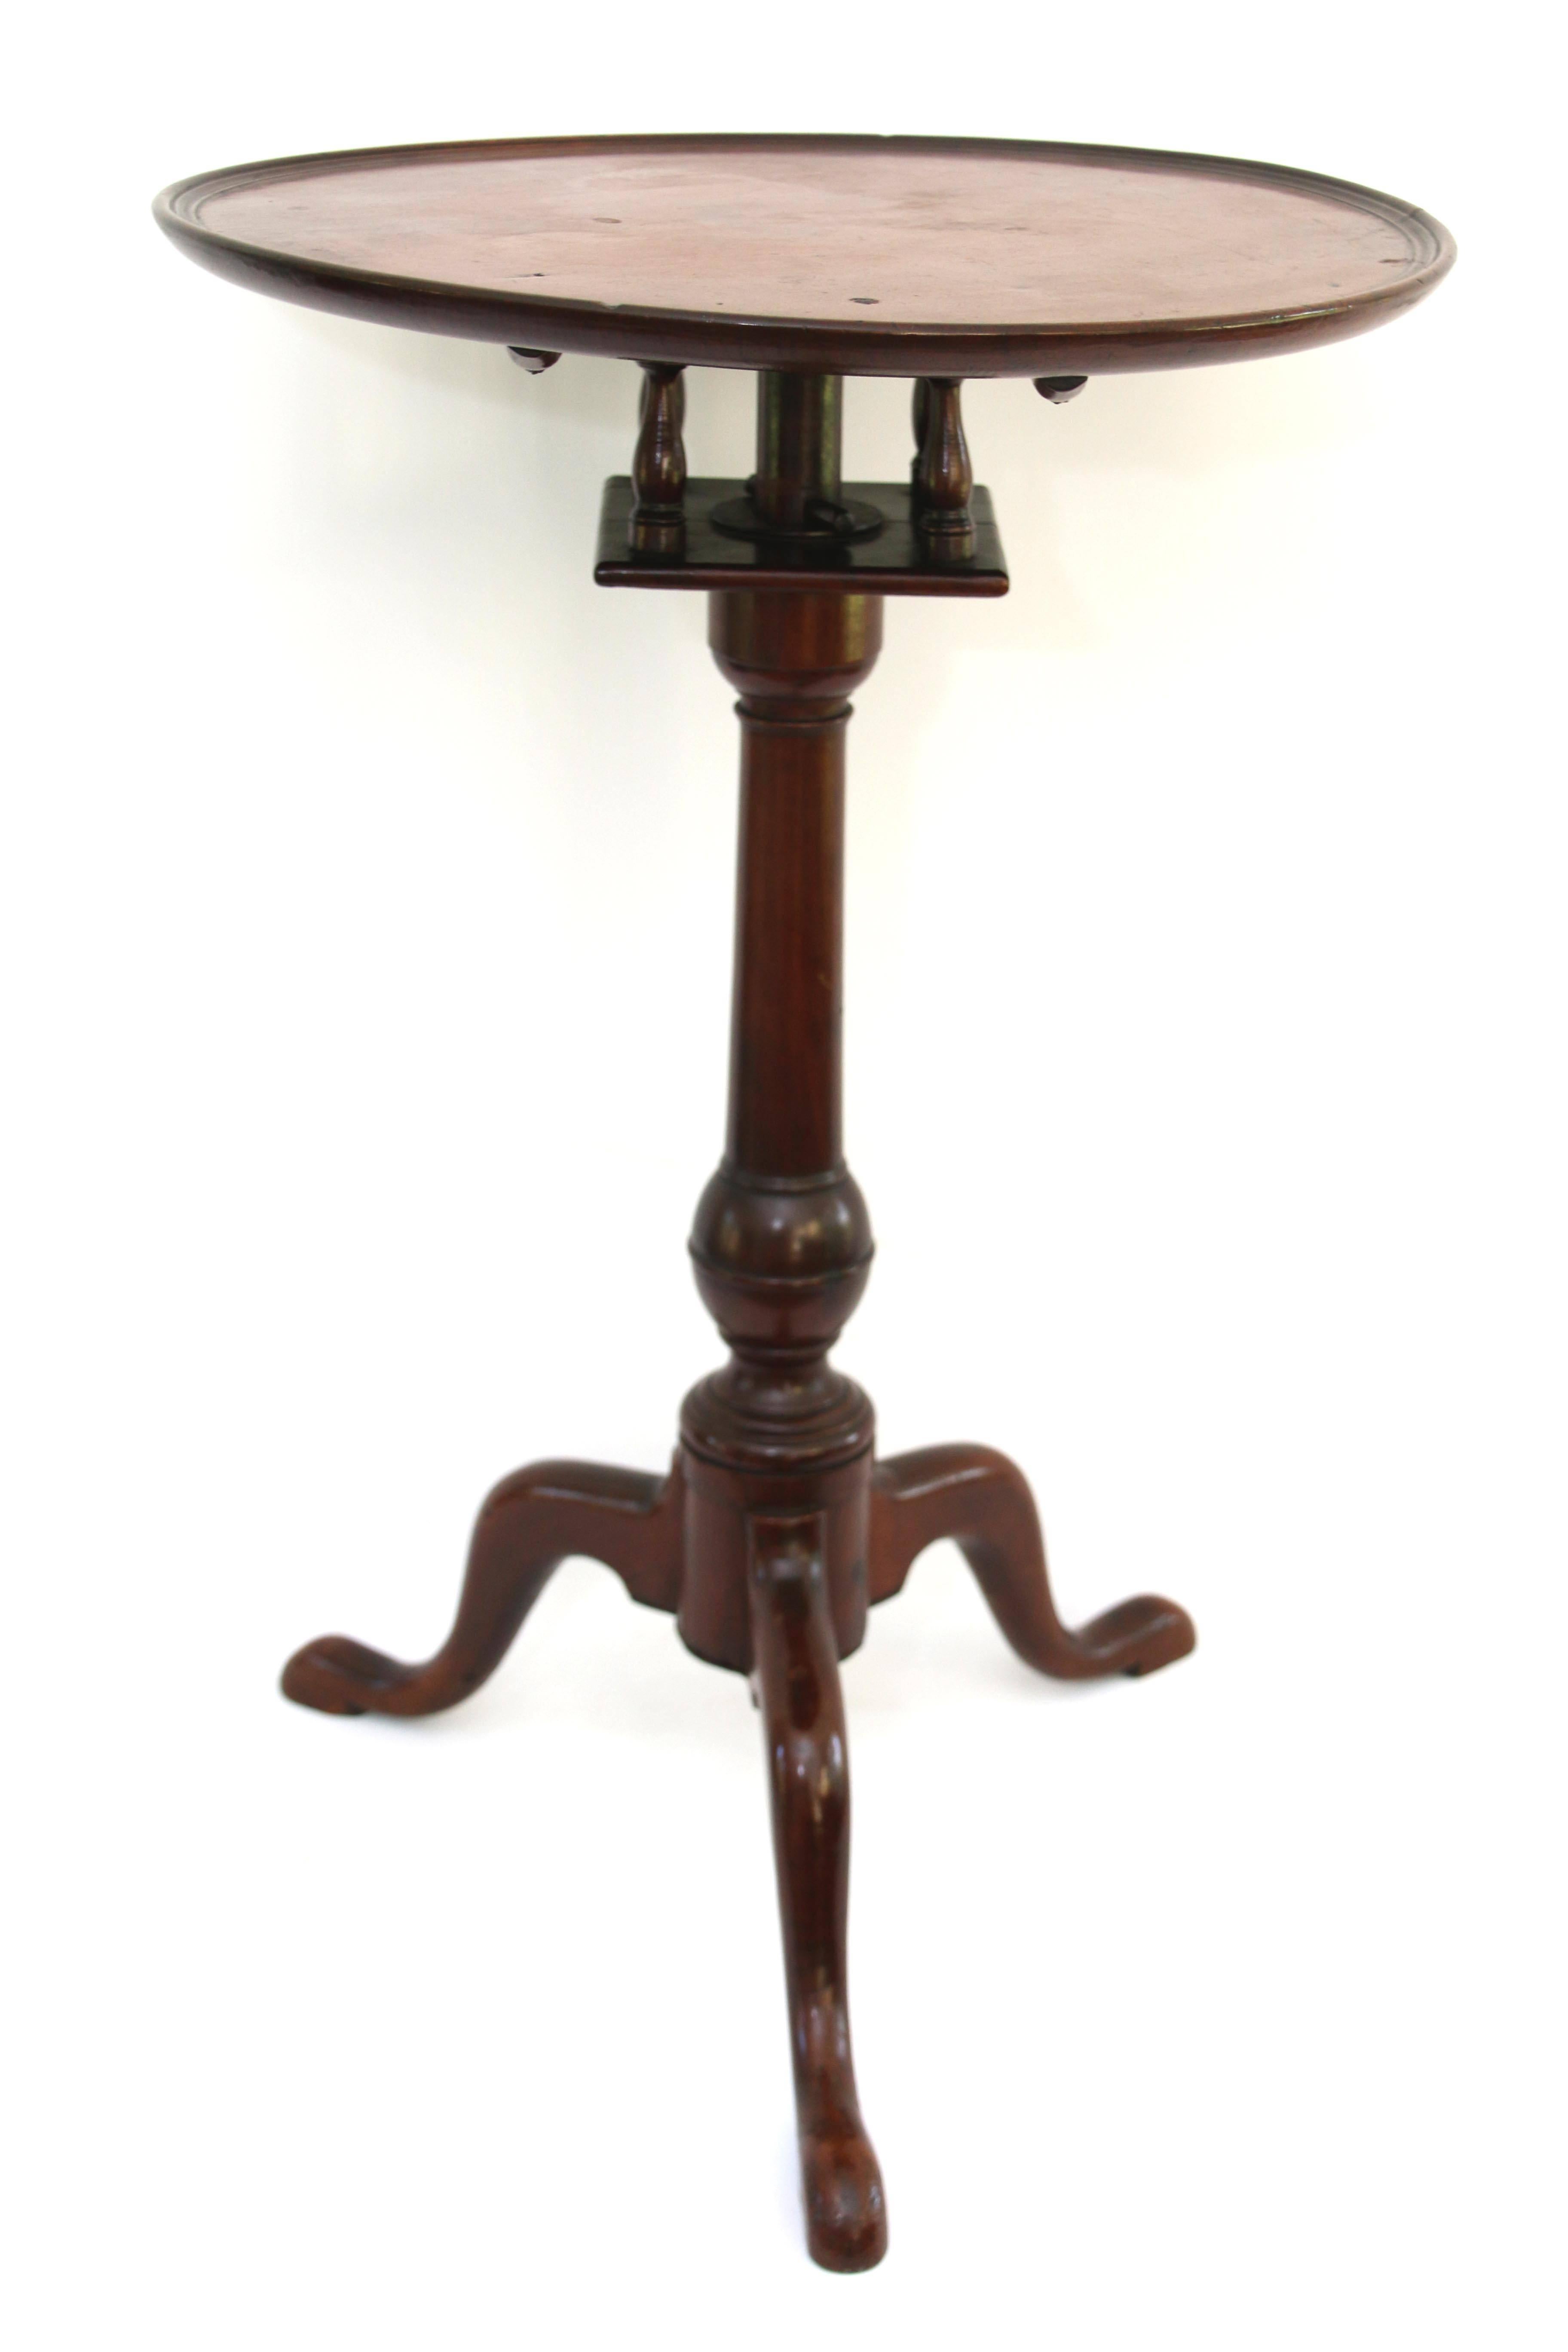 Late 18th Century Philadelphia Mahogany Queen-Anne Dish-Top Birdcage Candlestand For Sale